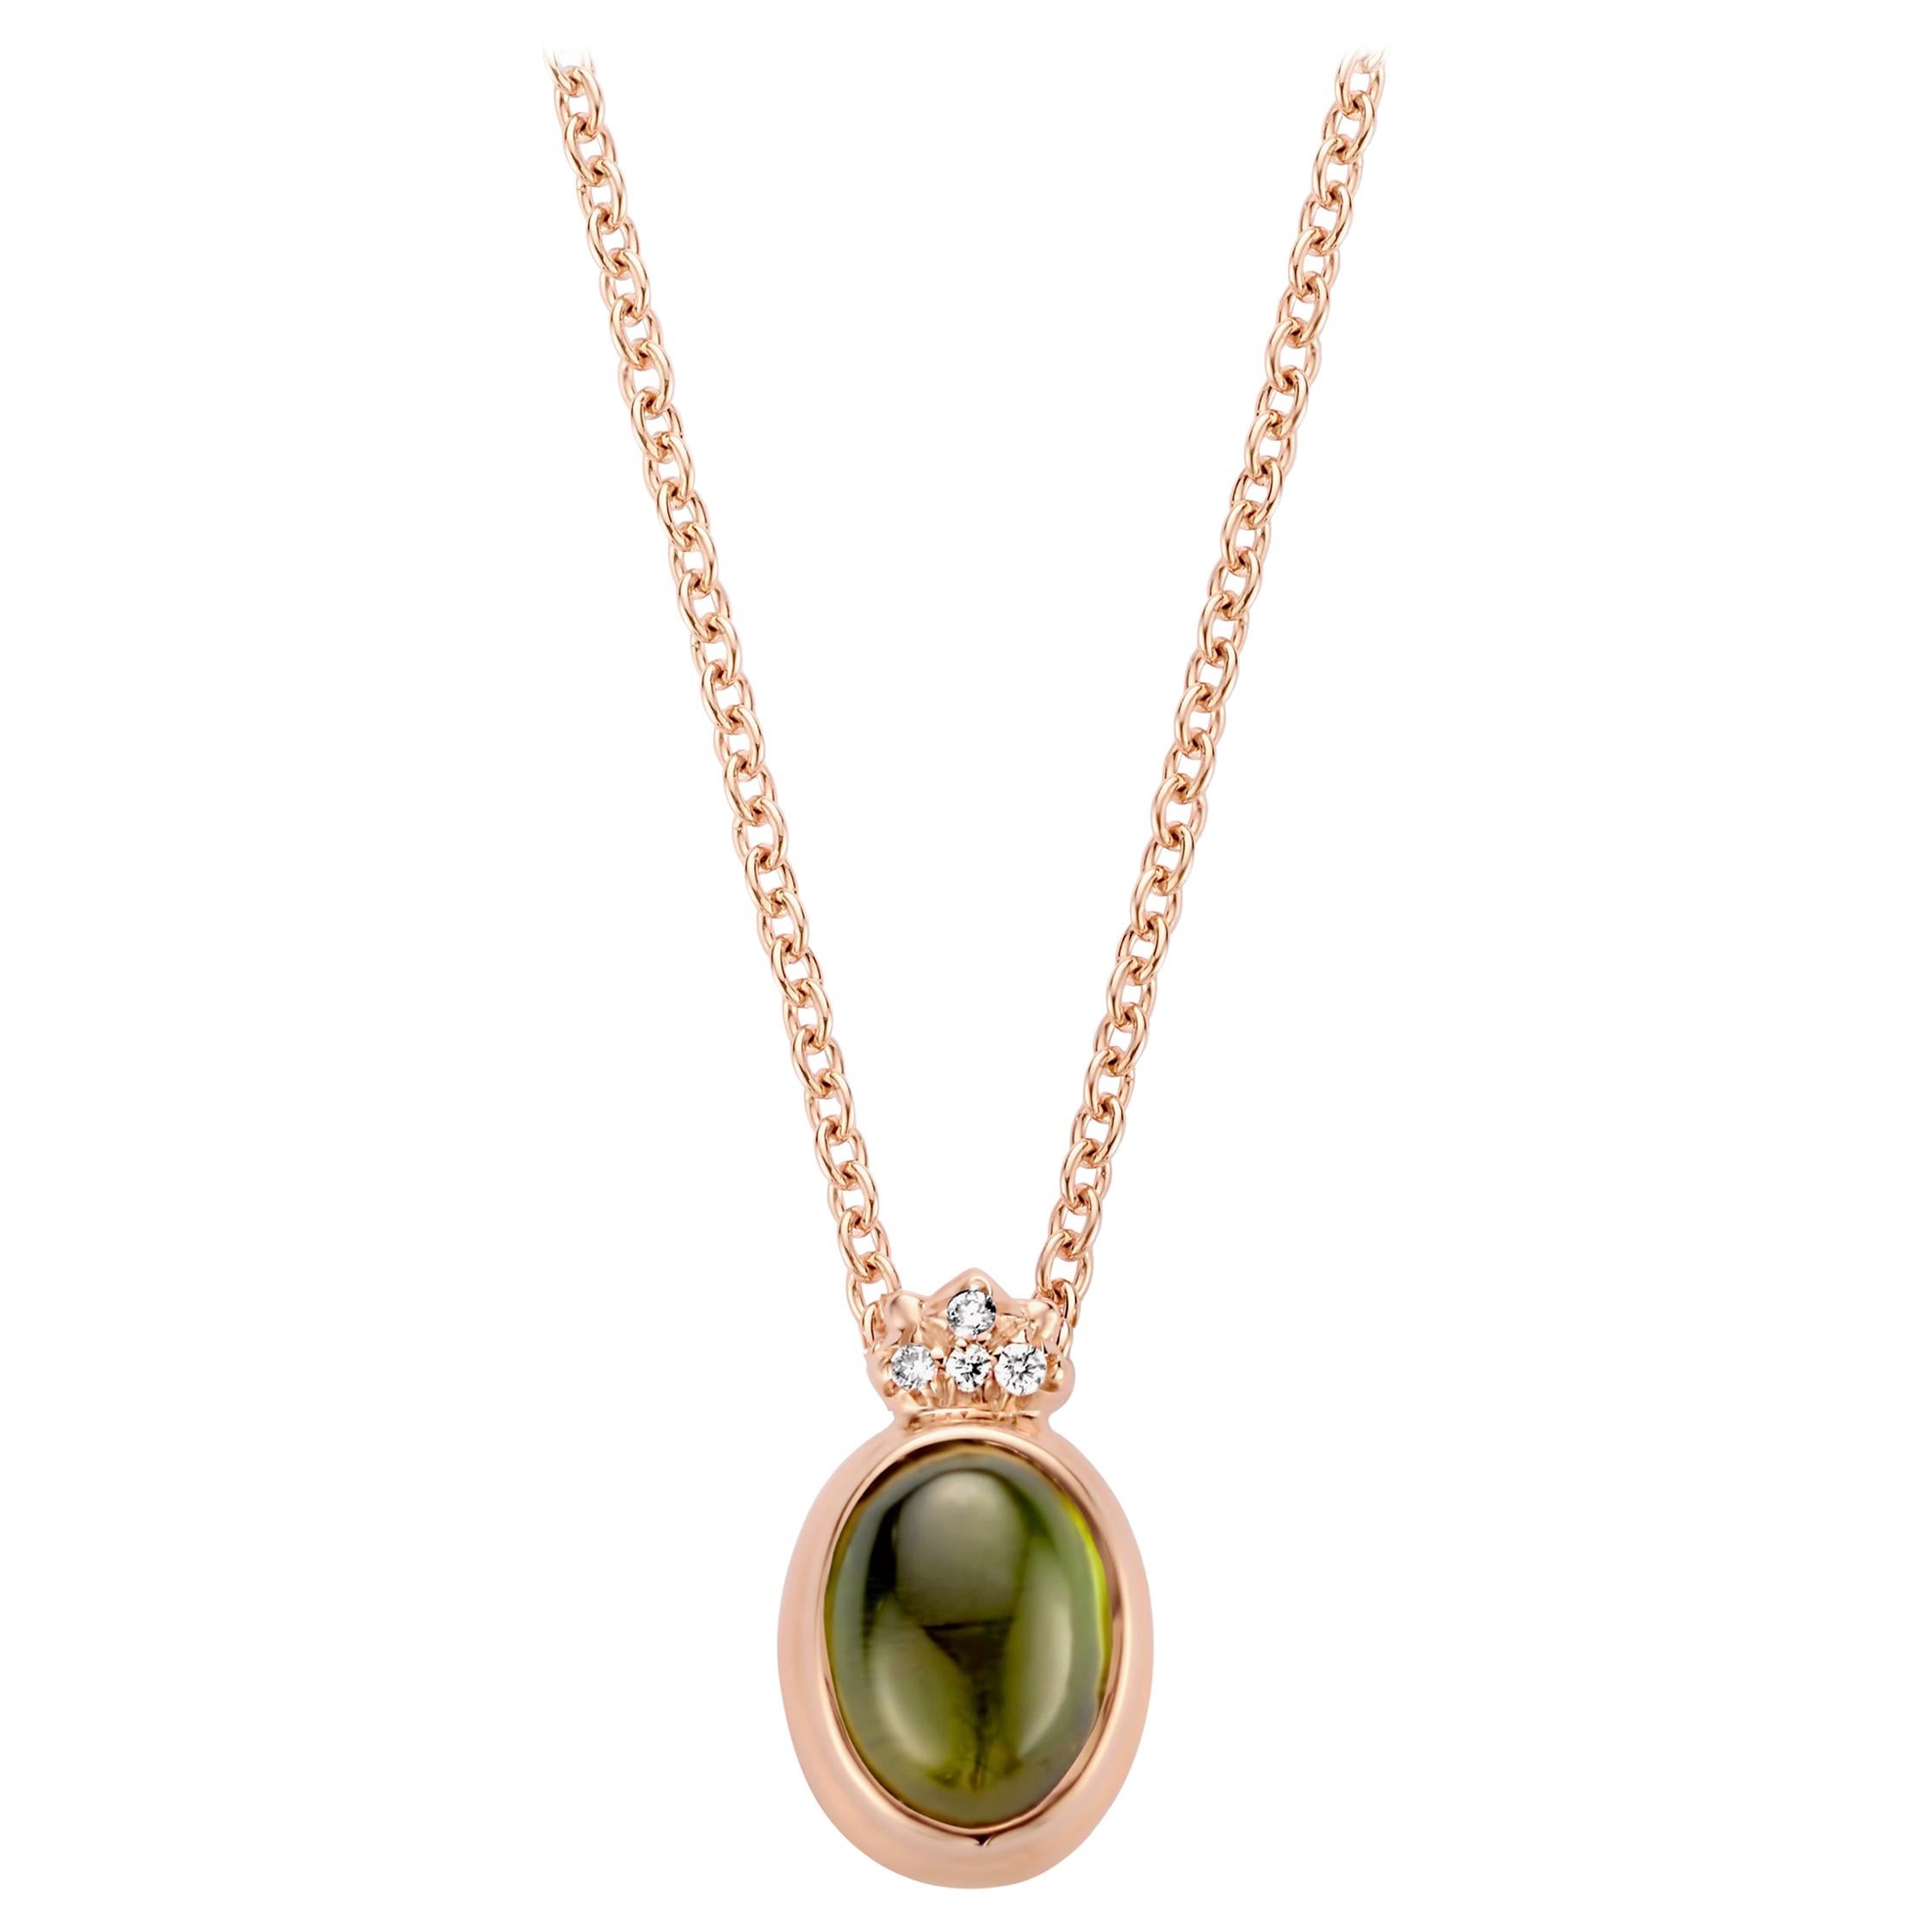 One of a kind lucky beetle necklace in 18K rose gold 3,7g set with the finest diamonds in brilliant cut 0,02Ct (VVS/DEF quality) and one natural, green tourmaline in oval cabochon cut 0,91Ct. The chain is 42 cm long.

Celine Roelens, a goldsmith and